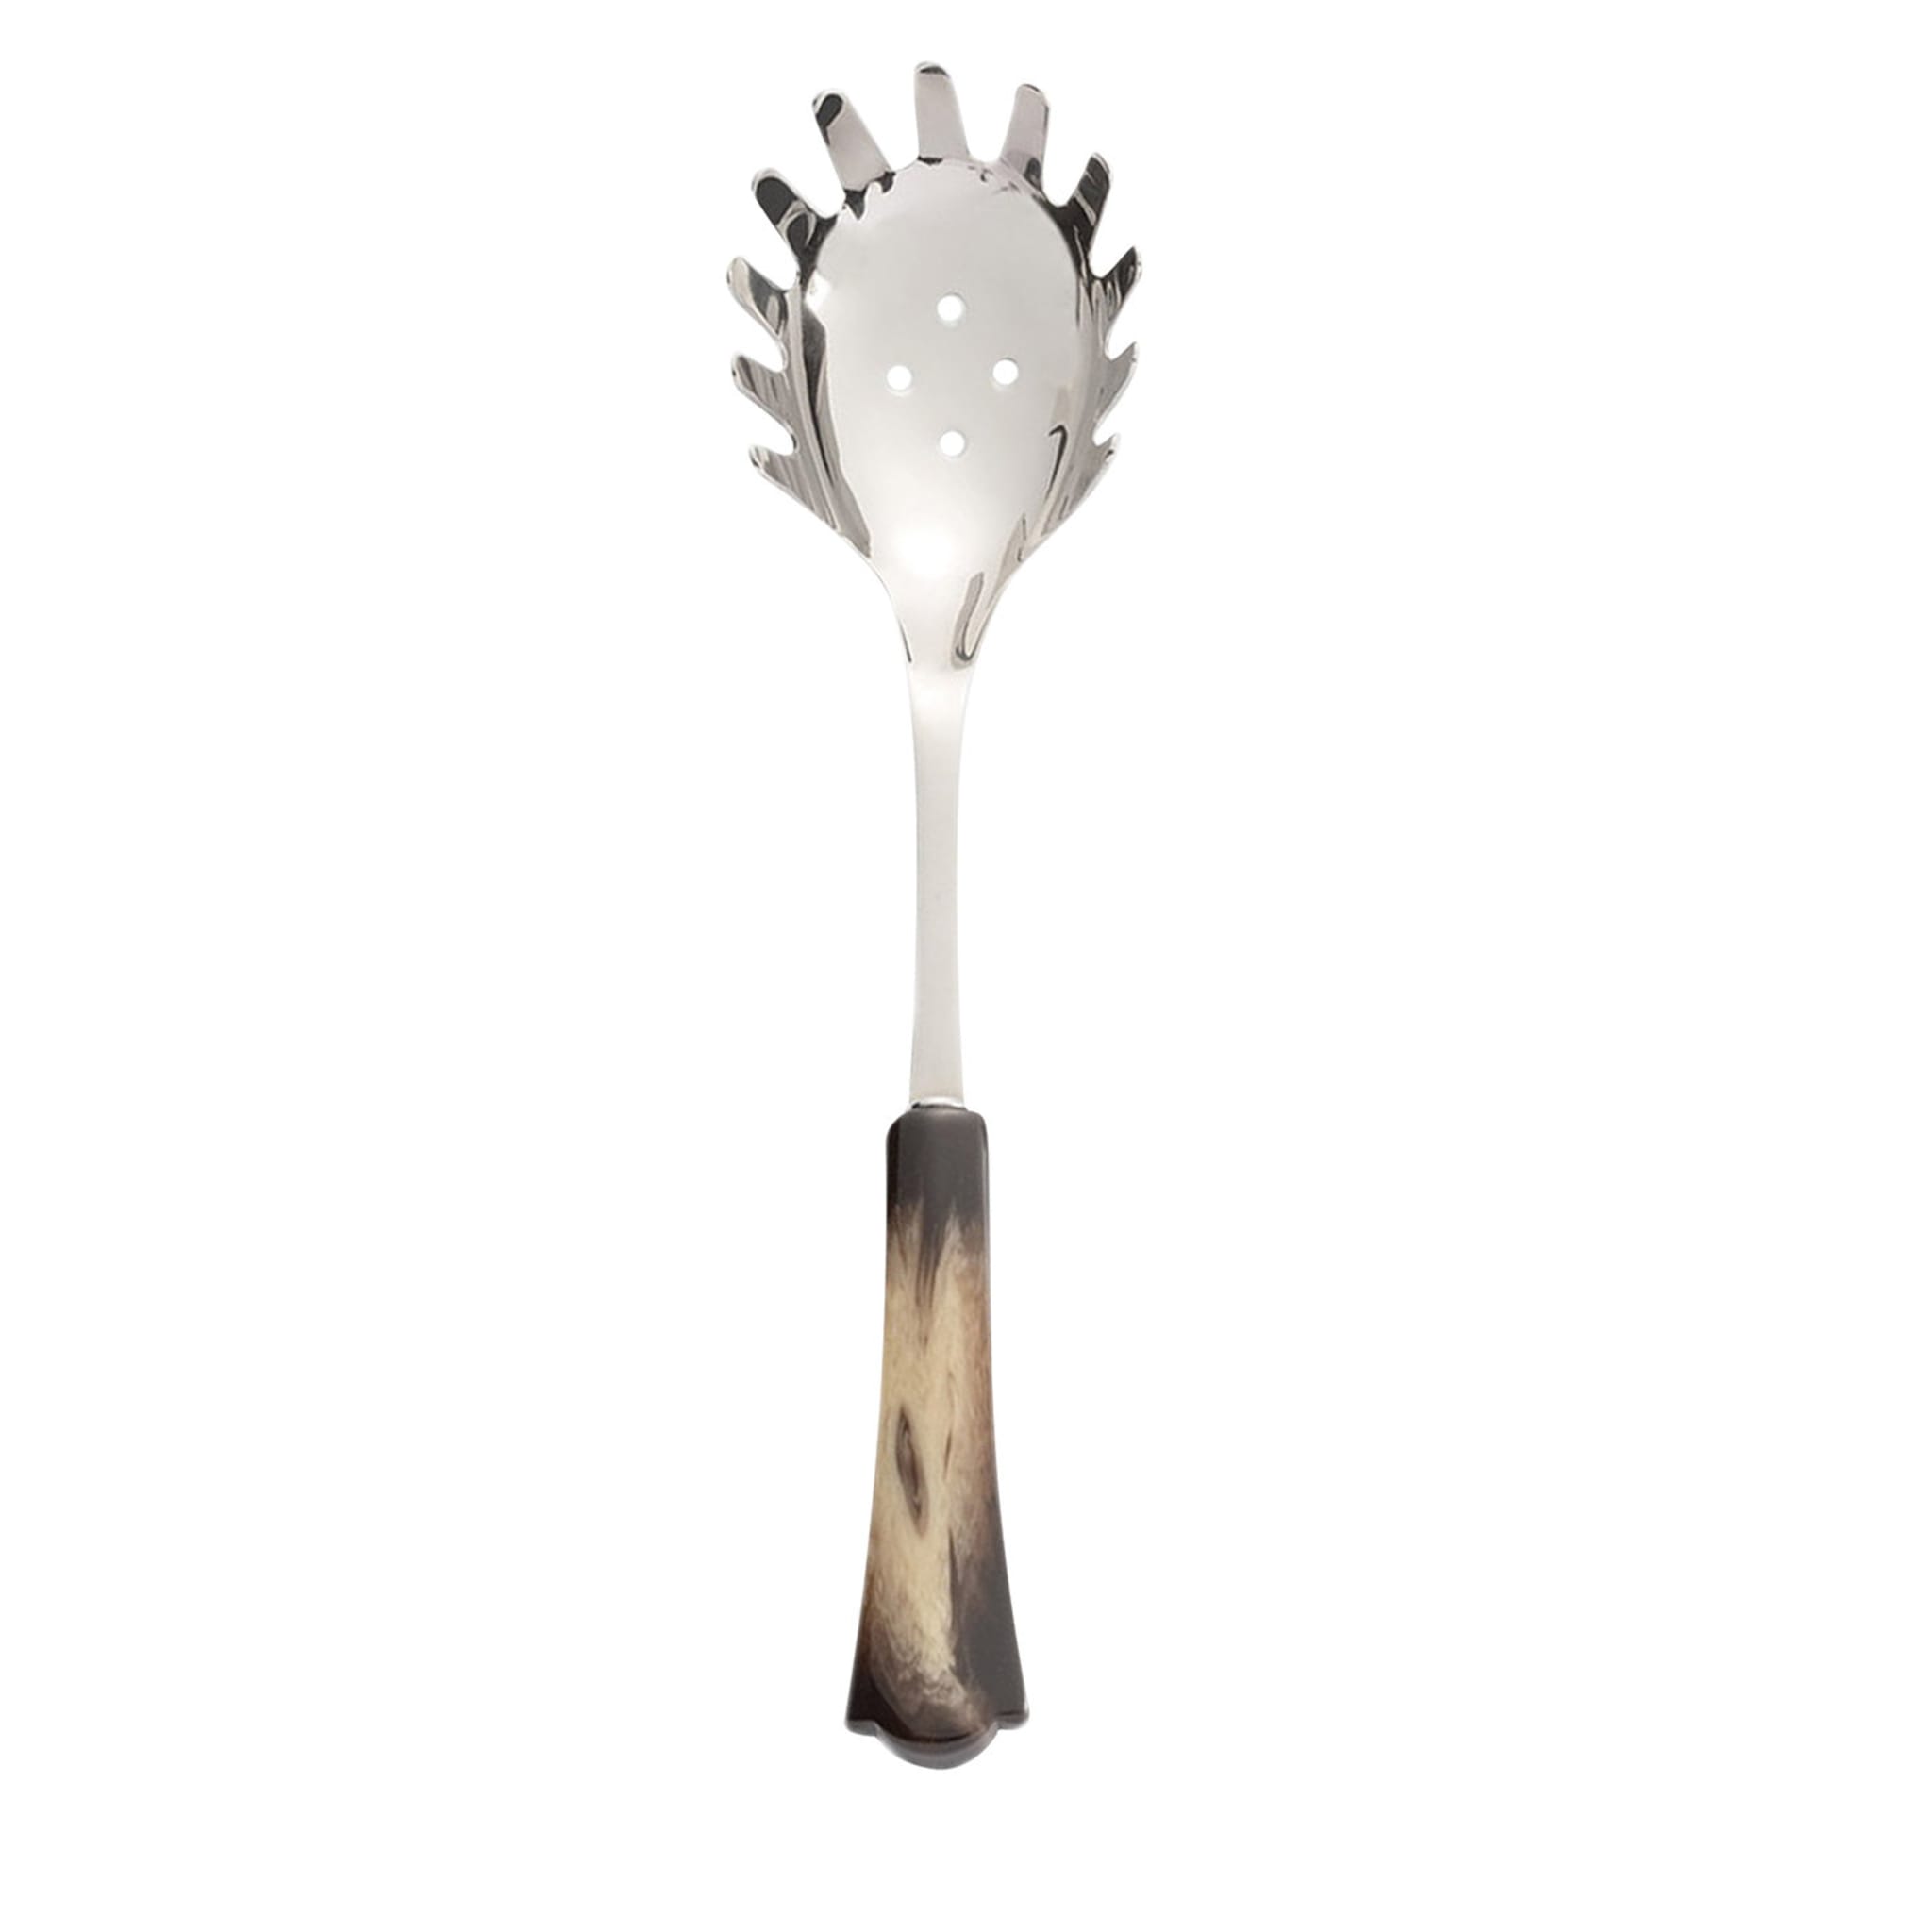 SPAGHETTI Pasta serving spoon by